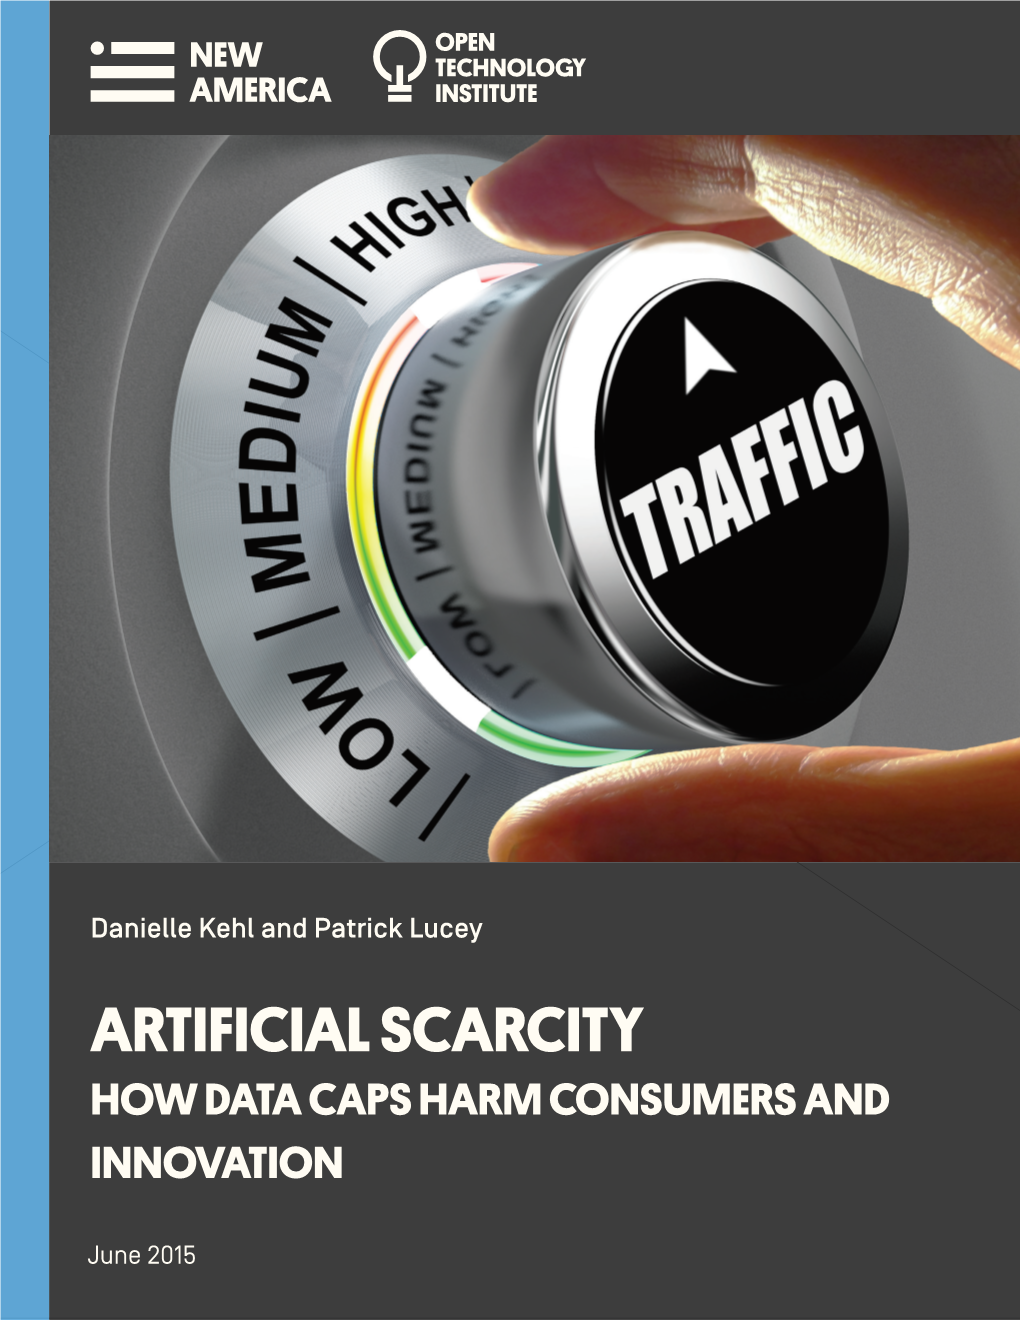 Artificial Scarcity How Data Caps Harm Consumers and Innovation